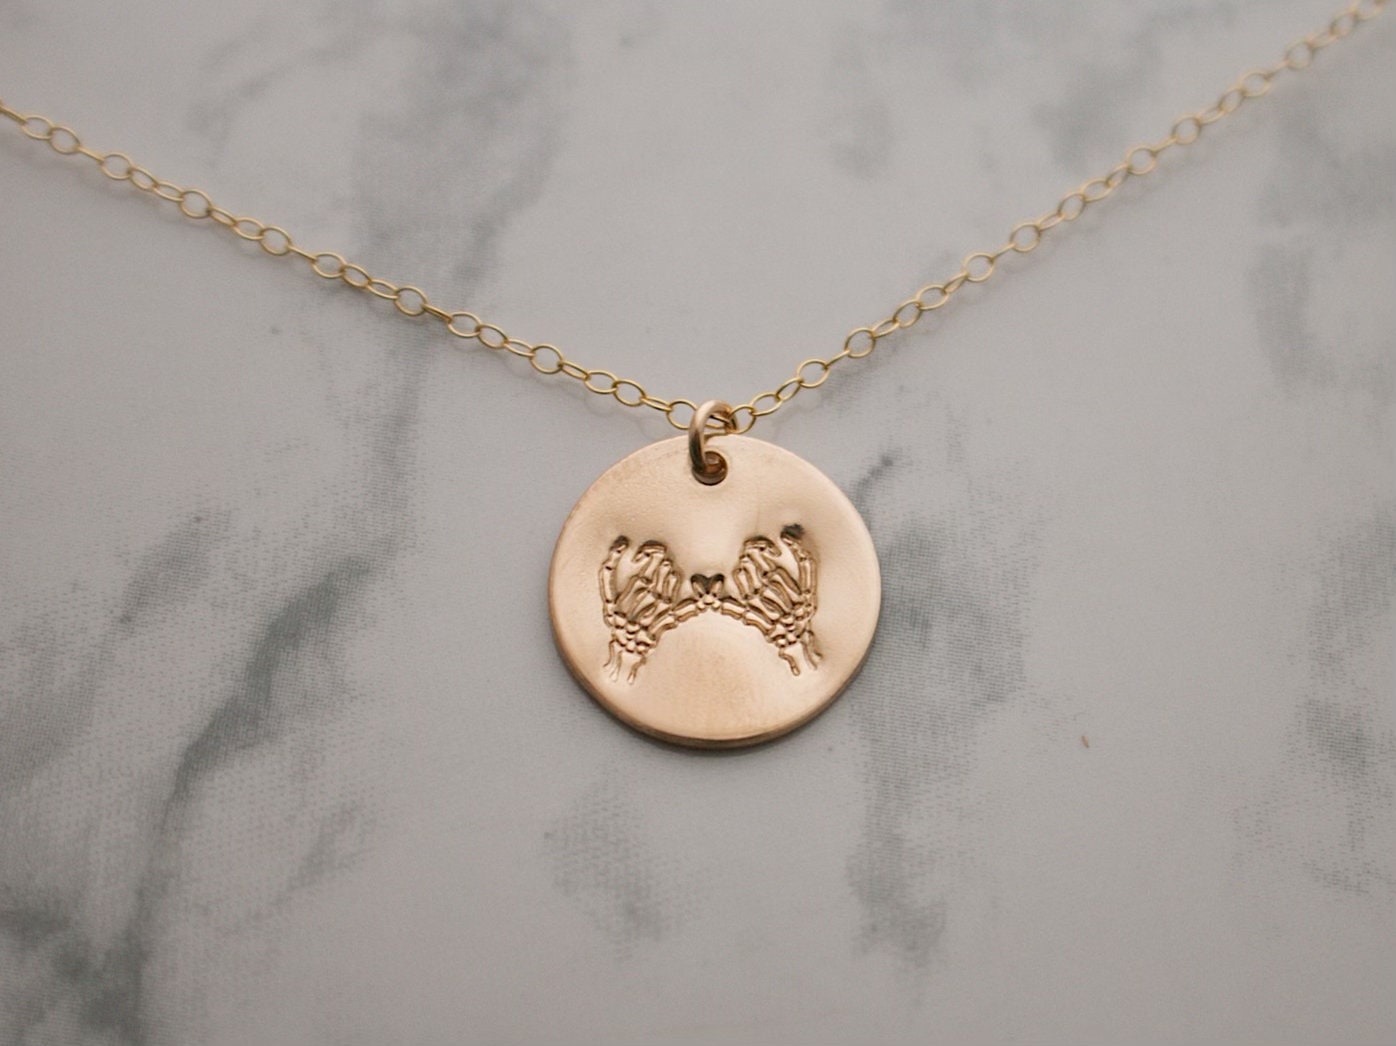 Skeleton Pinky Swear Gold Charm Necklace | Pinky Promise Necklace | Best Friend Necklace | Dainty Gold Necklace | Gold Everyday Jewelry